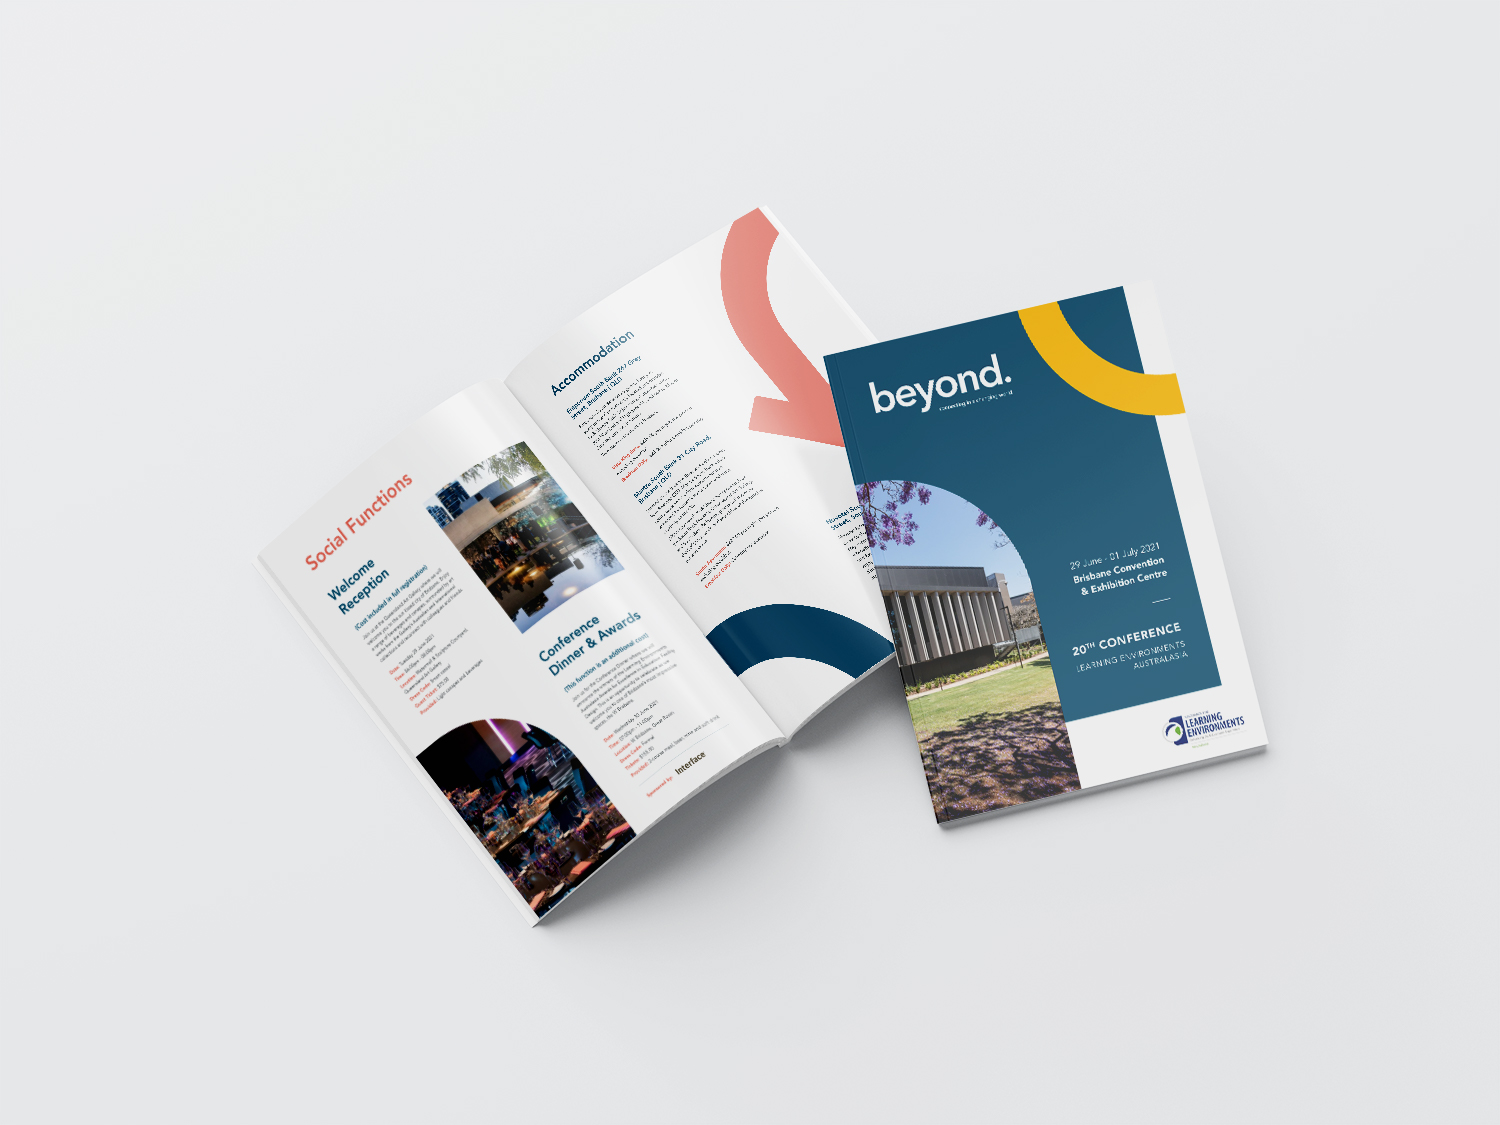 Beyond Conference Events